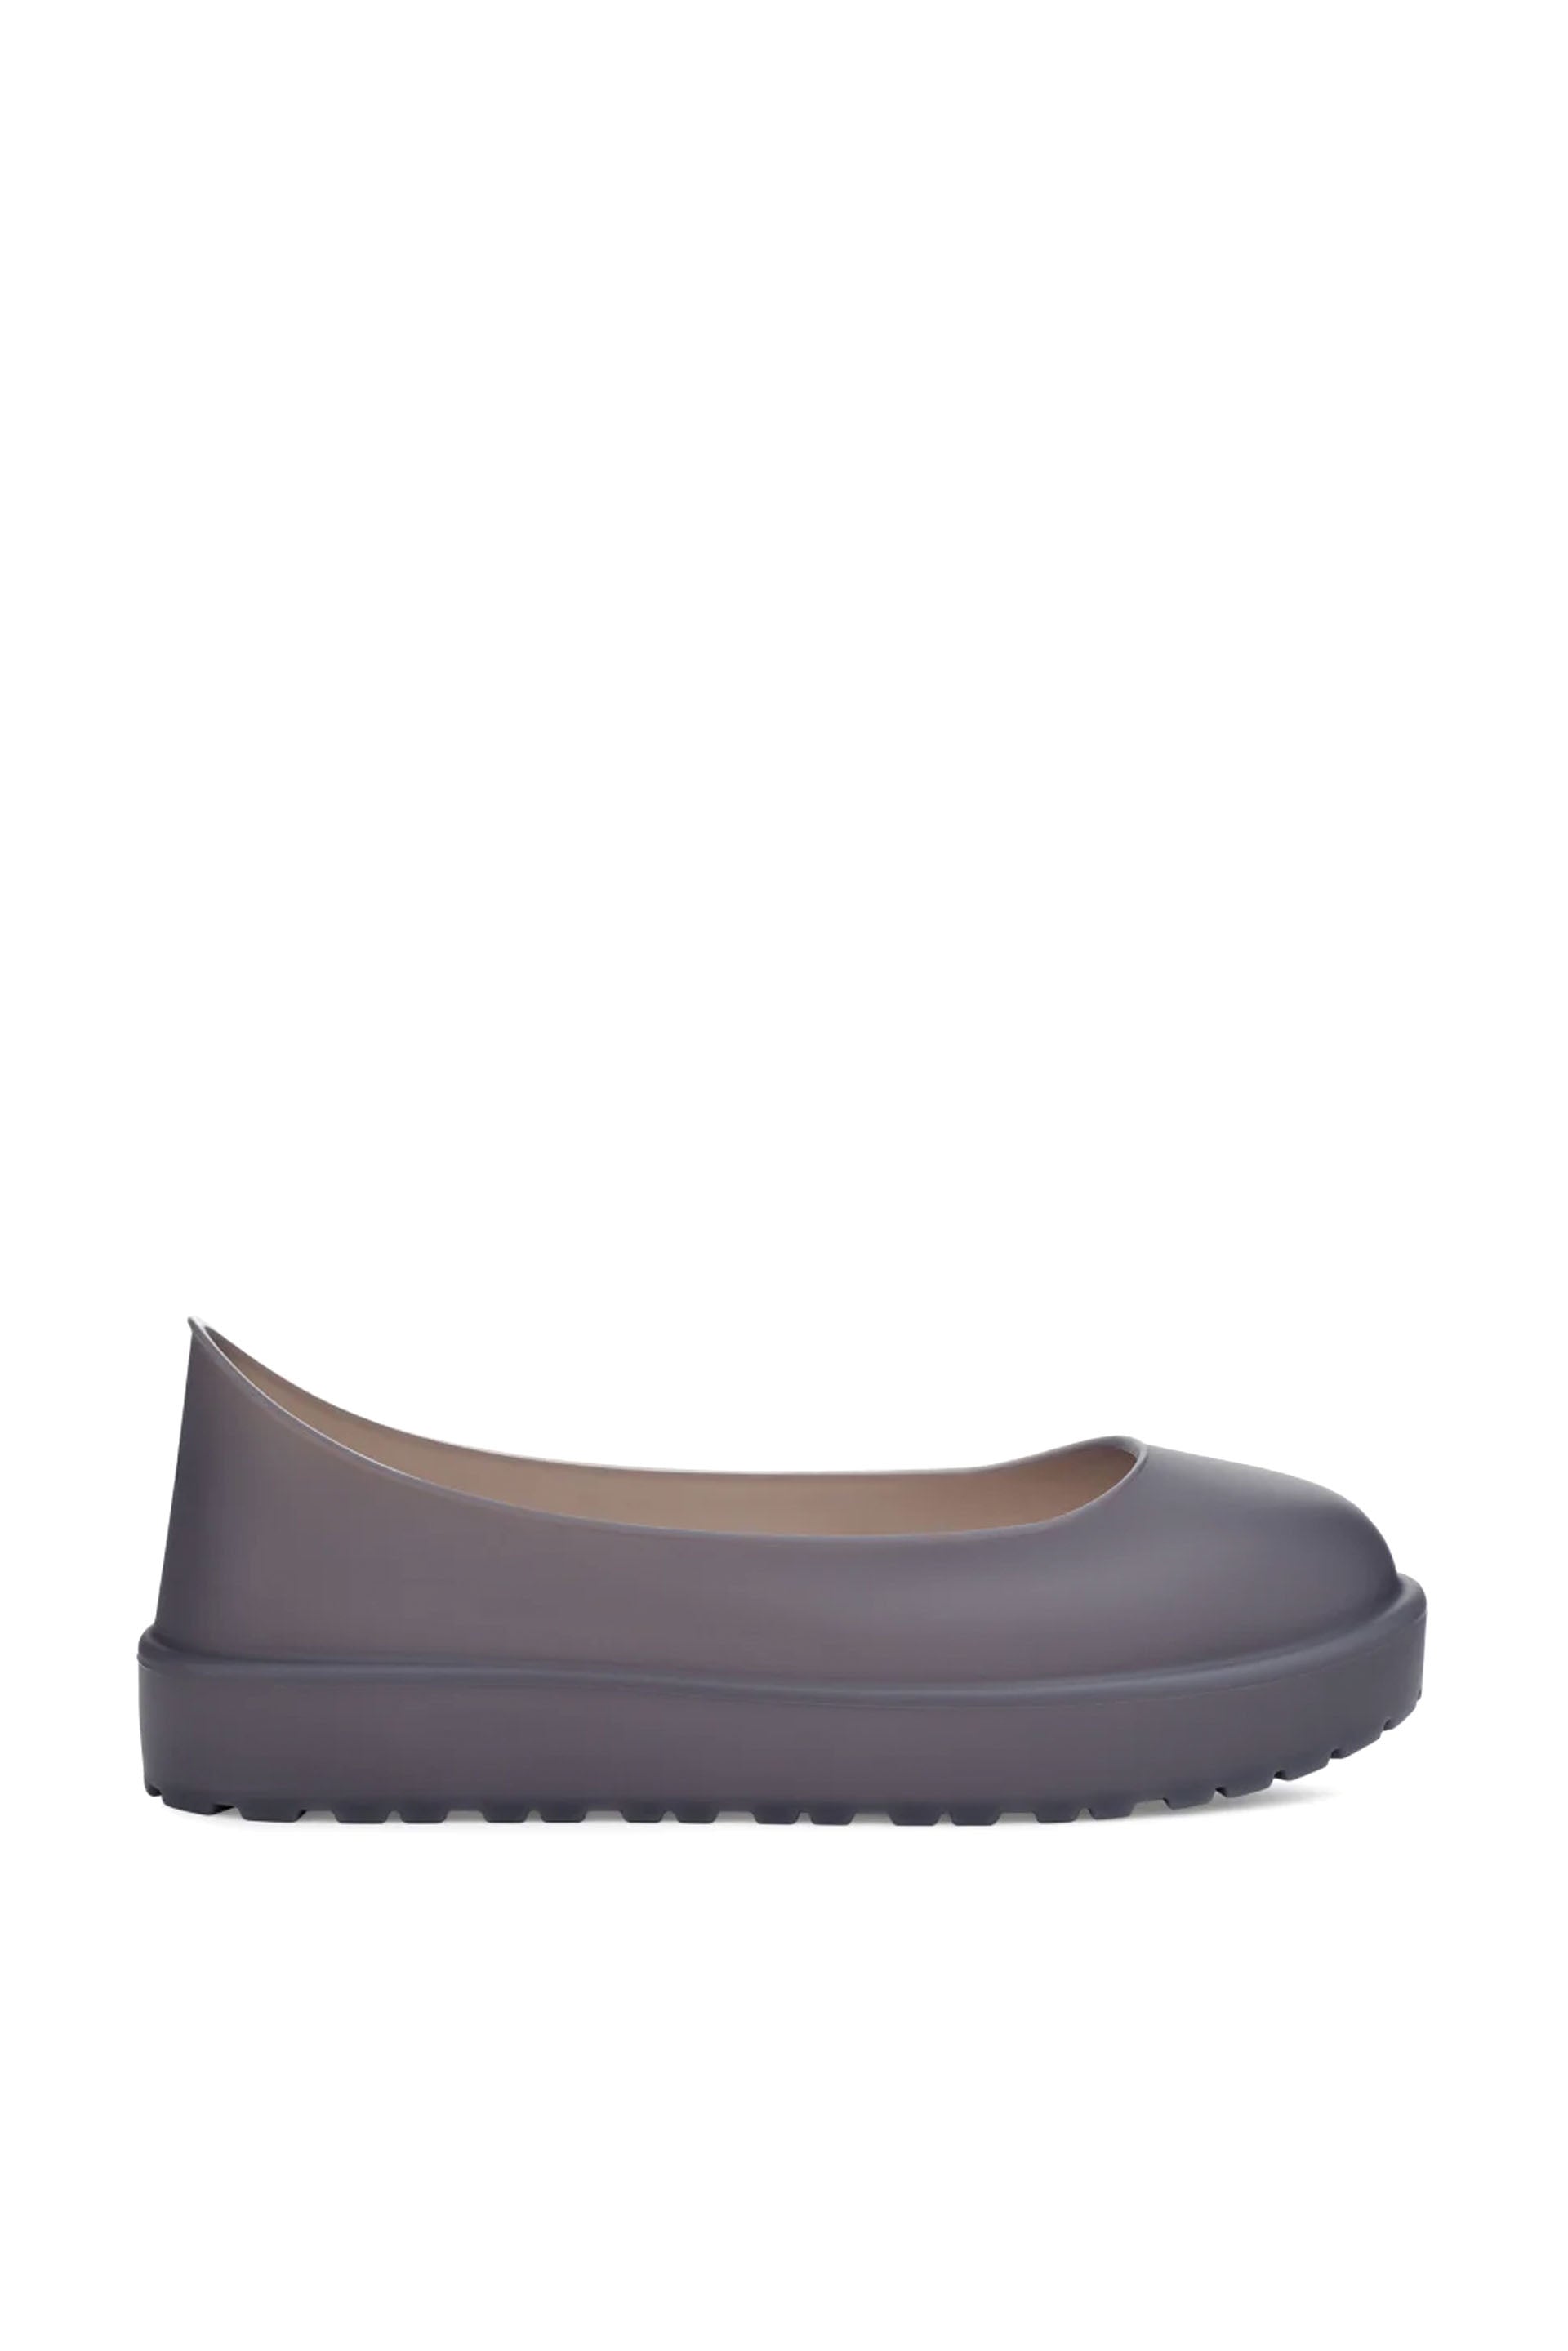 Couvre-chaussures Ugg Guard